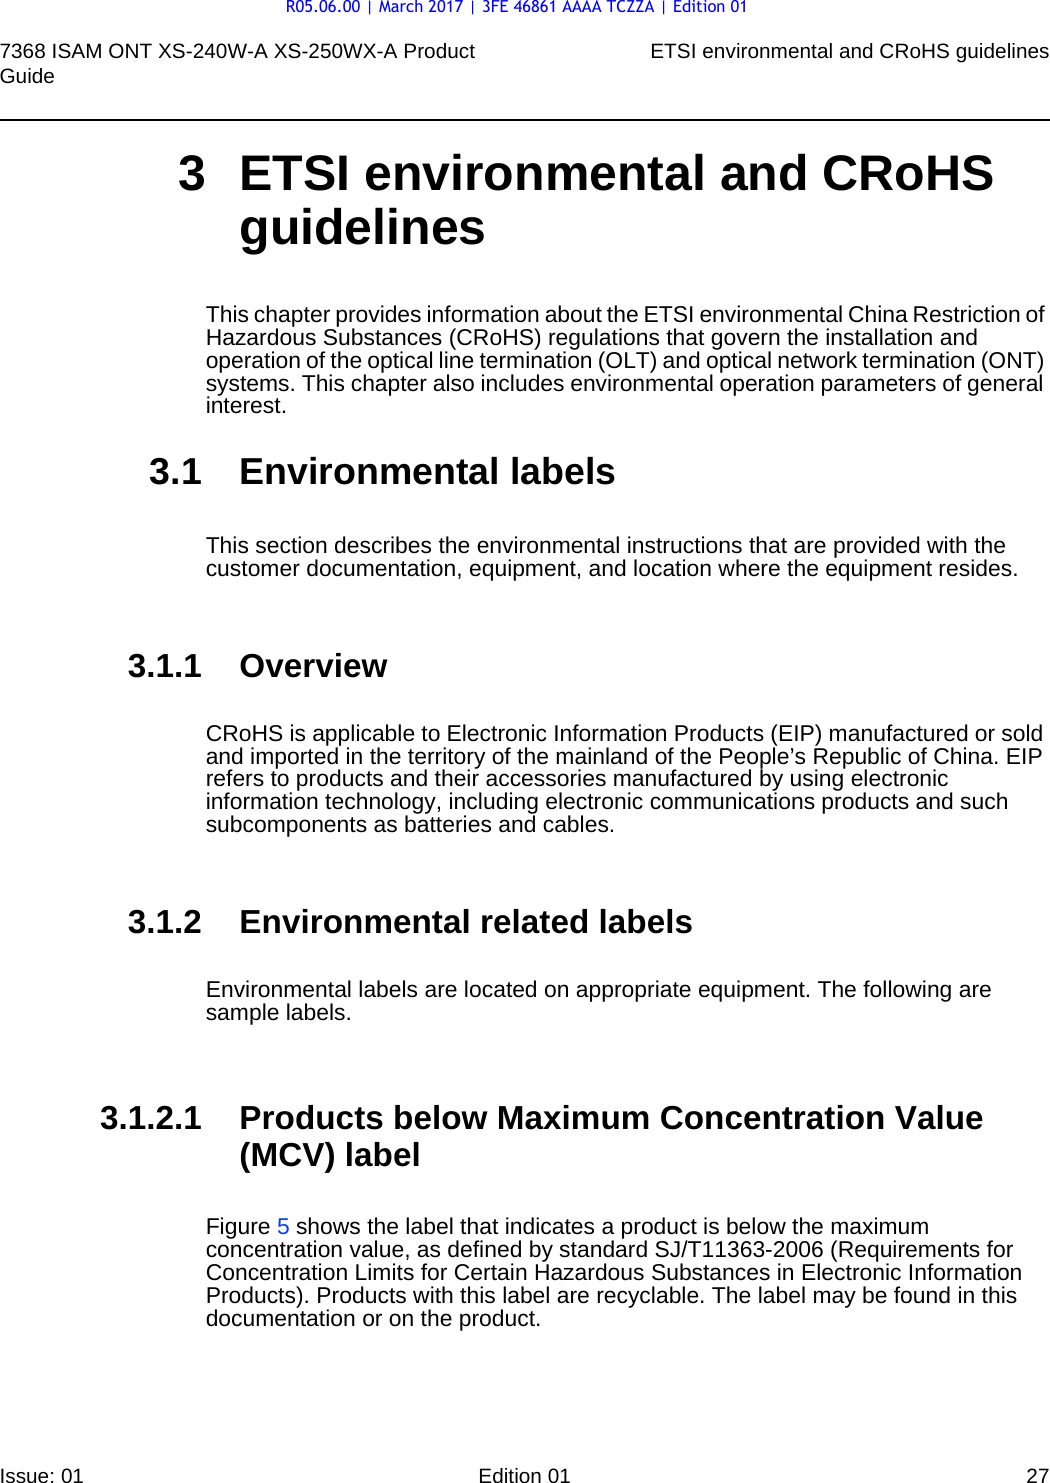 7368 ISAM ONT XS-240W-A XS-250WX-A Product Guide ETSI environmental and CRoHS guidelinesIssue: 01 Edition 01 27 3 ETSI environmental and CRoHS guidelinesThis chapter provides information about the ETSI environmental China Restriction of Hazardous Substances (CRoHS) regulations that govern the installation and operation of the optical line termination (OLT) and optical network termination (ONT) systems. This chapter also includes environmental operation parameters of general interest.3.1 Environmental labelsThis section describes the environmental instructions that are provided with the customer documentation, equipment, and location where the equipment resides.3.1.1 OverviewCRoHS is applicable to Electronic Information Products (EIP) manufactured or sold and imported in the territory of the mainland of the People’s Republic of China. EIP refers to products and their accessories manufactured by using electronic information technology, including electronic communications products and such subcomponents as batteries and cables.3.1.2 Environmental related labelsEnvironmental labels are located on appropriate equipment. The following are sample labels.3.1.2.1 Products below Maximum Concentration Value (MCV) labelFigure 5 shows the label that indicates a product is below the maximum concentration value, as defined by standard SJ/T11363-2006 (Requirements for Concentration Limits for Certain Hazardous Substances in Electronic Information Products). Products with this label are recyclable. The label may be found in this documentation or on the product.R05.06.00 | March 2017 | 3FE 46861 AAAA TCZZA | Edition 01